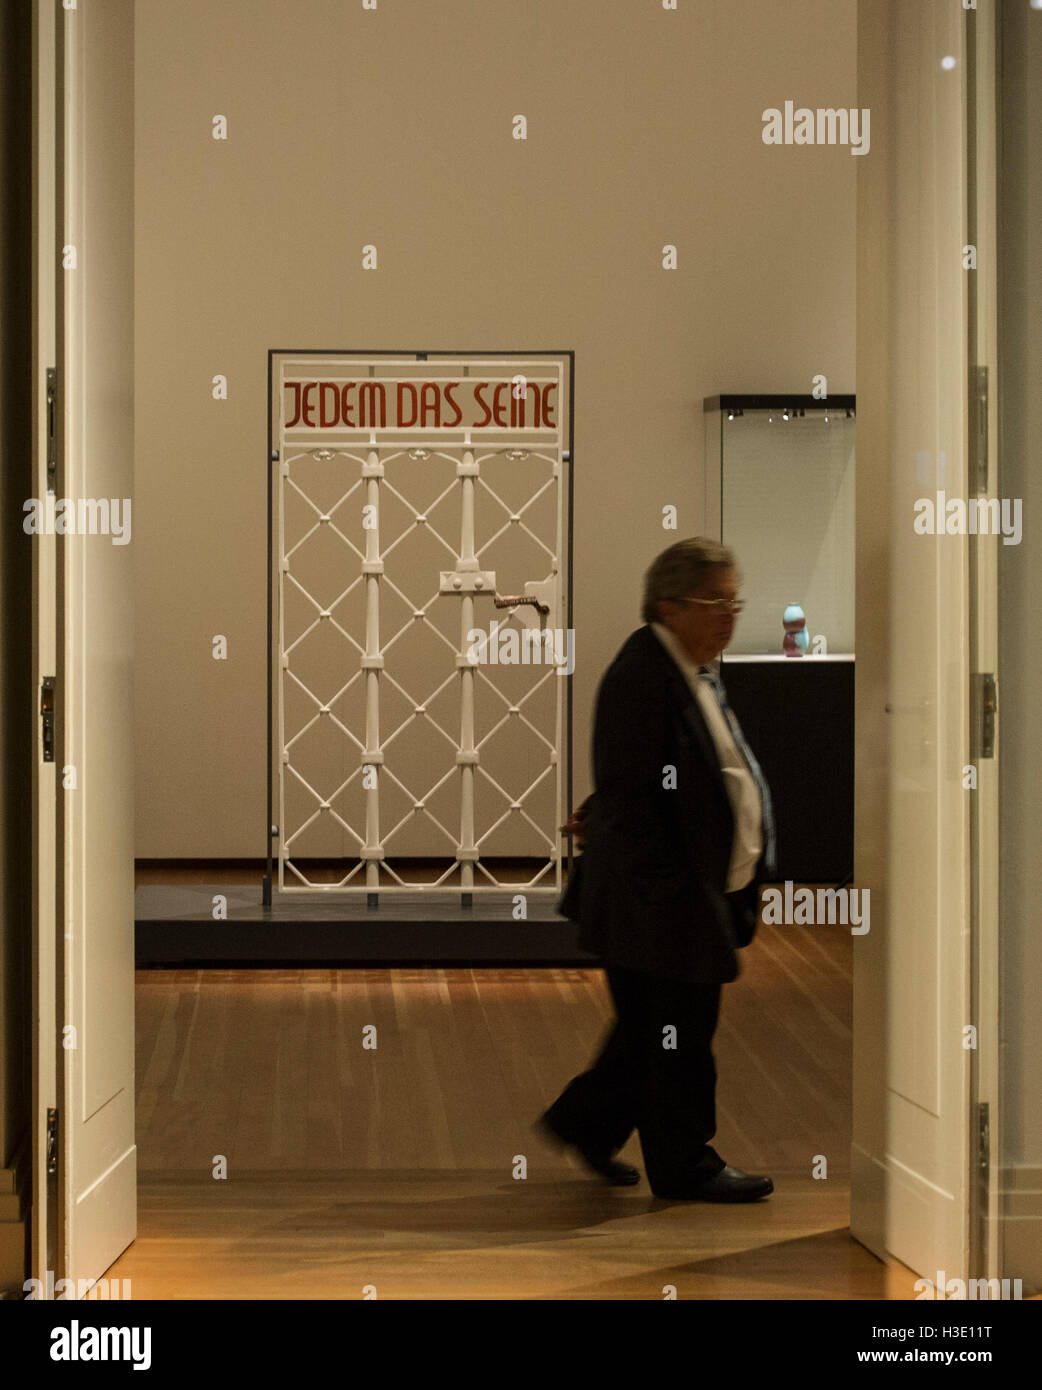 Berlin, Germany. 07th Oct, 2016. Journalists walk past the gate from Buchenwald concentration camp with the lettering 'Jedem das Seine' during the press preview of the exhibition 'Deutschland - Erinnerungen einer Nation' (lit. Germany - Memories of a Nation) at Martin-Gropius-Bau in Berlin, Germany, 07 October 2016. PHOTO: PAUL ZINKEN/DPA/Alamy Live News Stock Photo